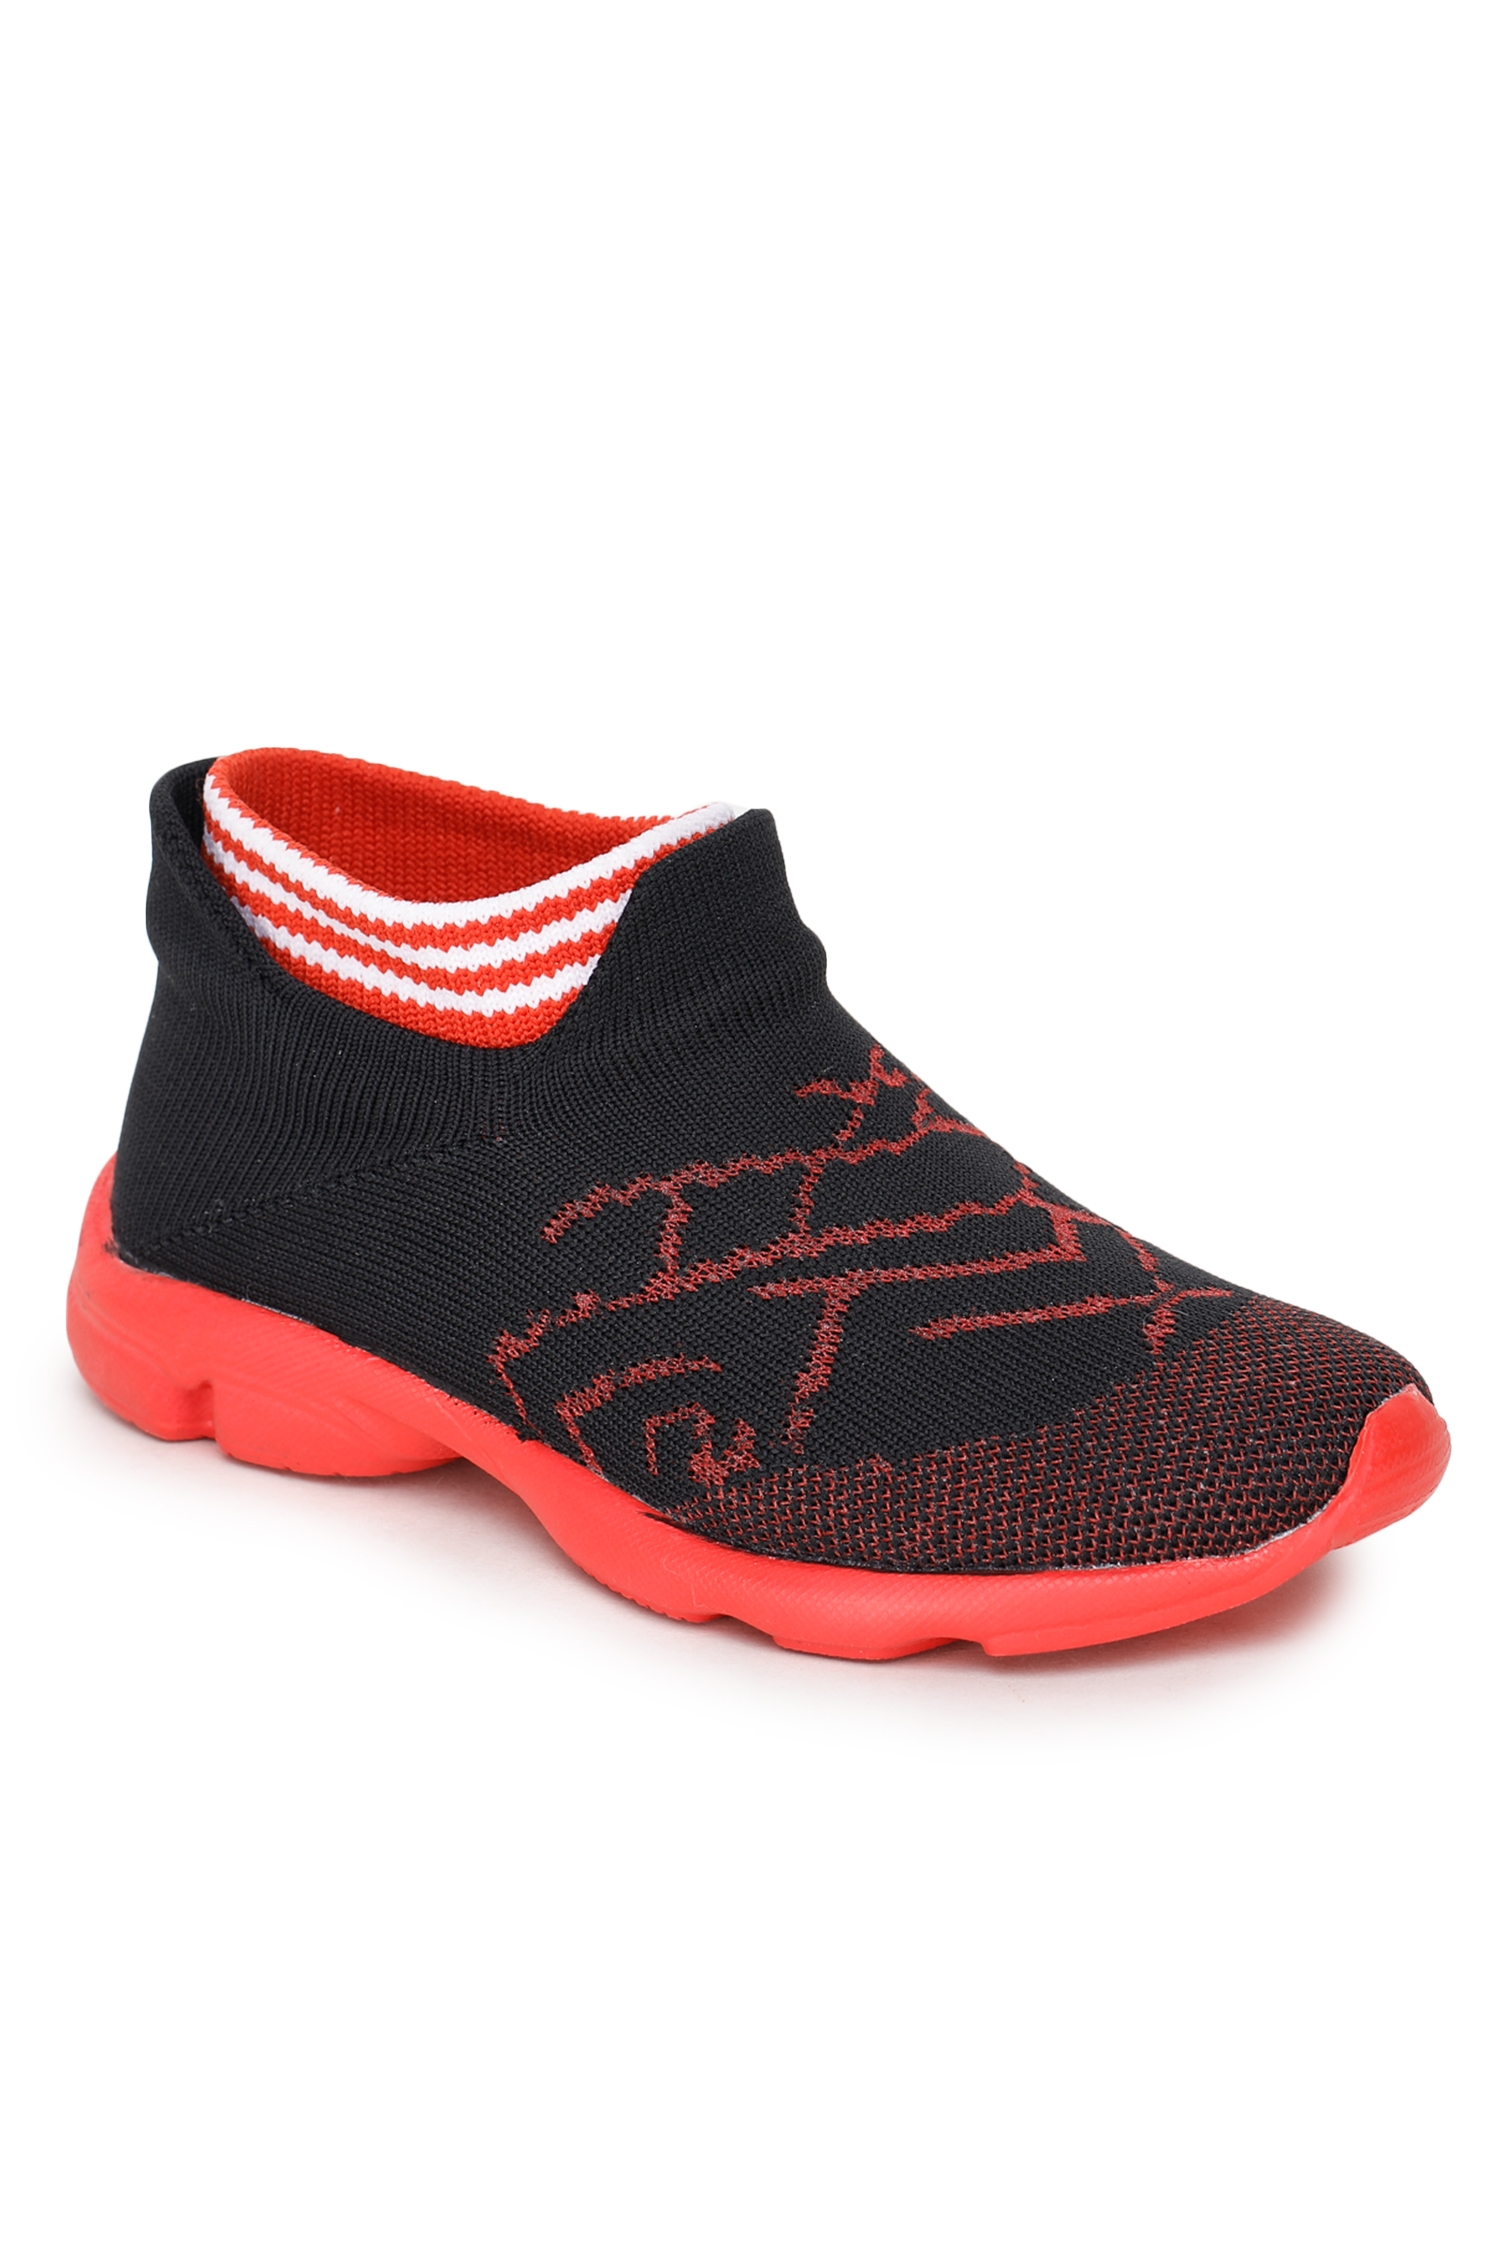 Lucy & Luke by Liberty KSN-207 Red Casual Shoes for Kids